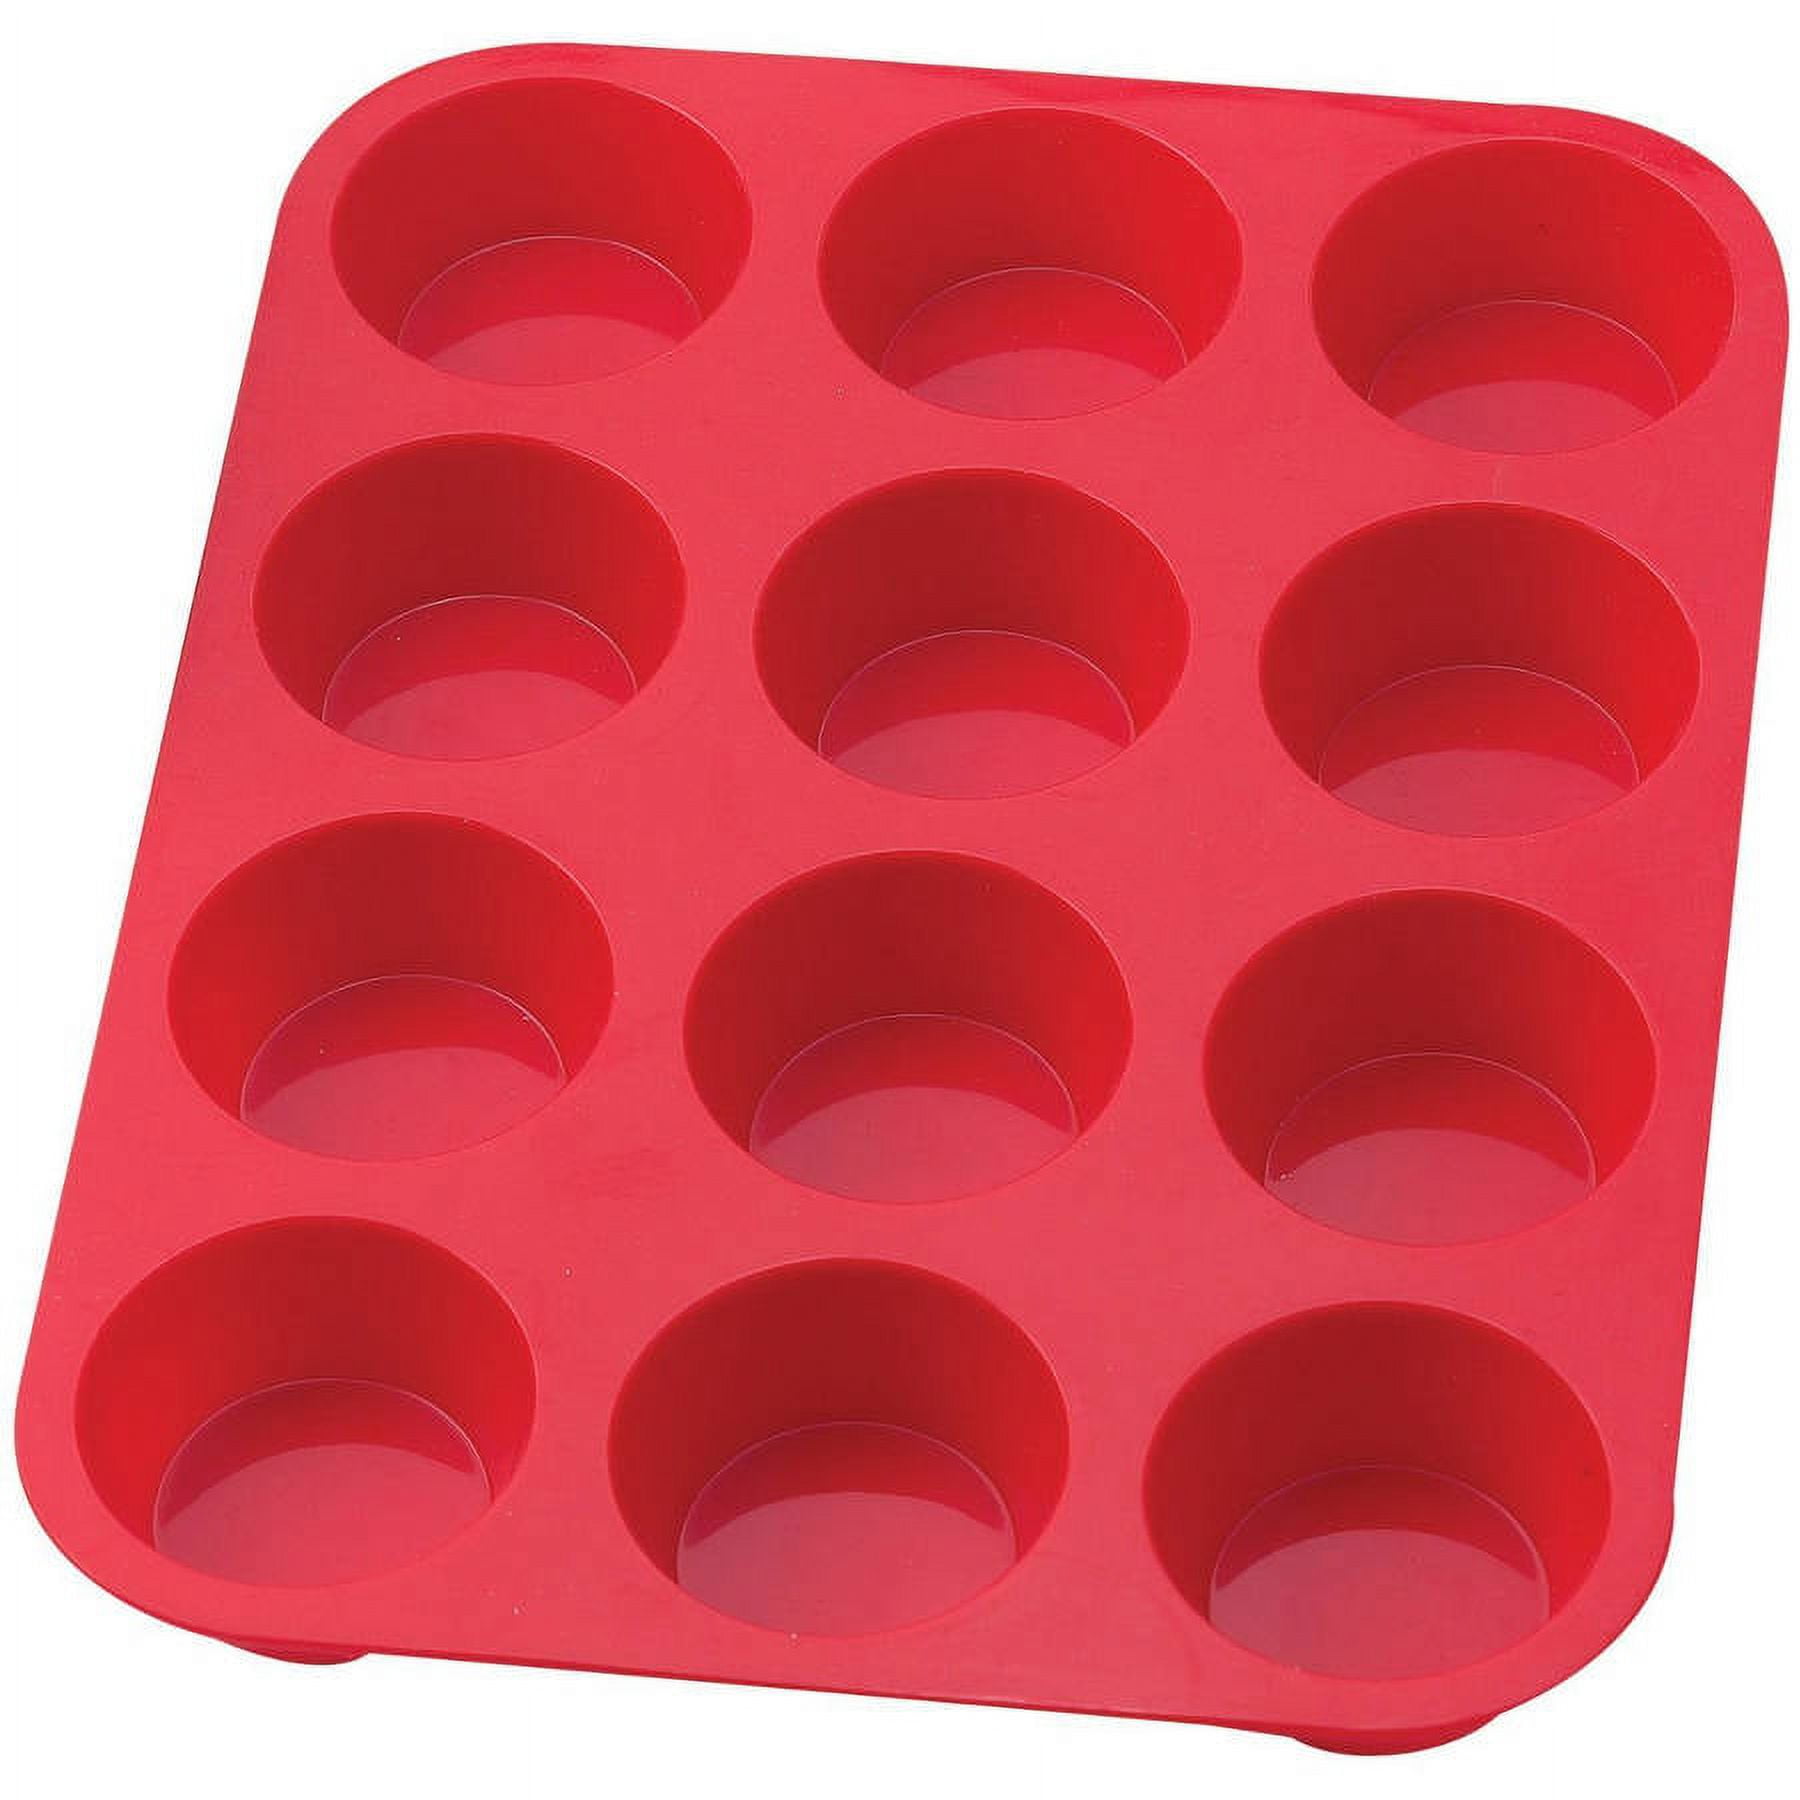  Mini Muffin &Cupcake Set, 24 Cups 2-Pieces, Nonstick Silicone  Baking Pan, BPA Free and Dishwasher Safe, Great for Making Muffin Cakes,  Tart, Bread (24 Cups Red,2 PCS): Home & Kitchen